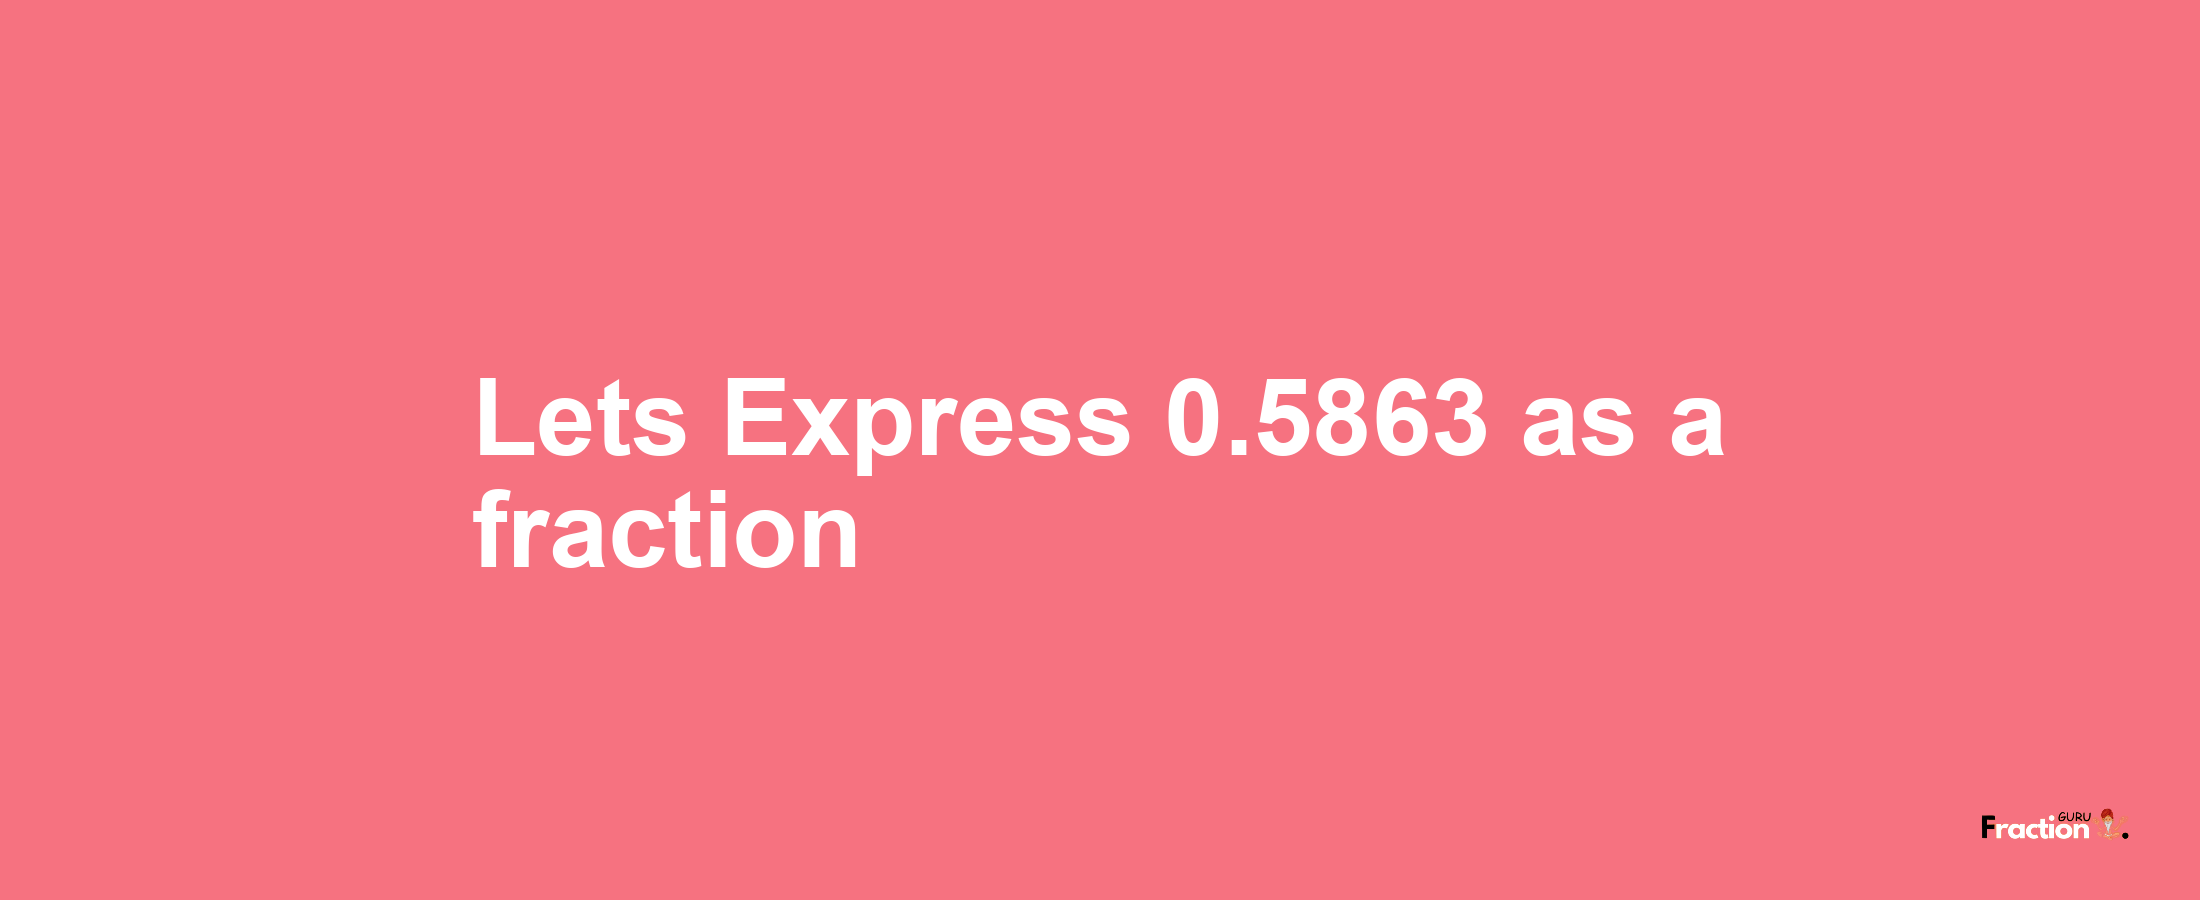 Lets Express 0.5863 as afraction